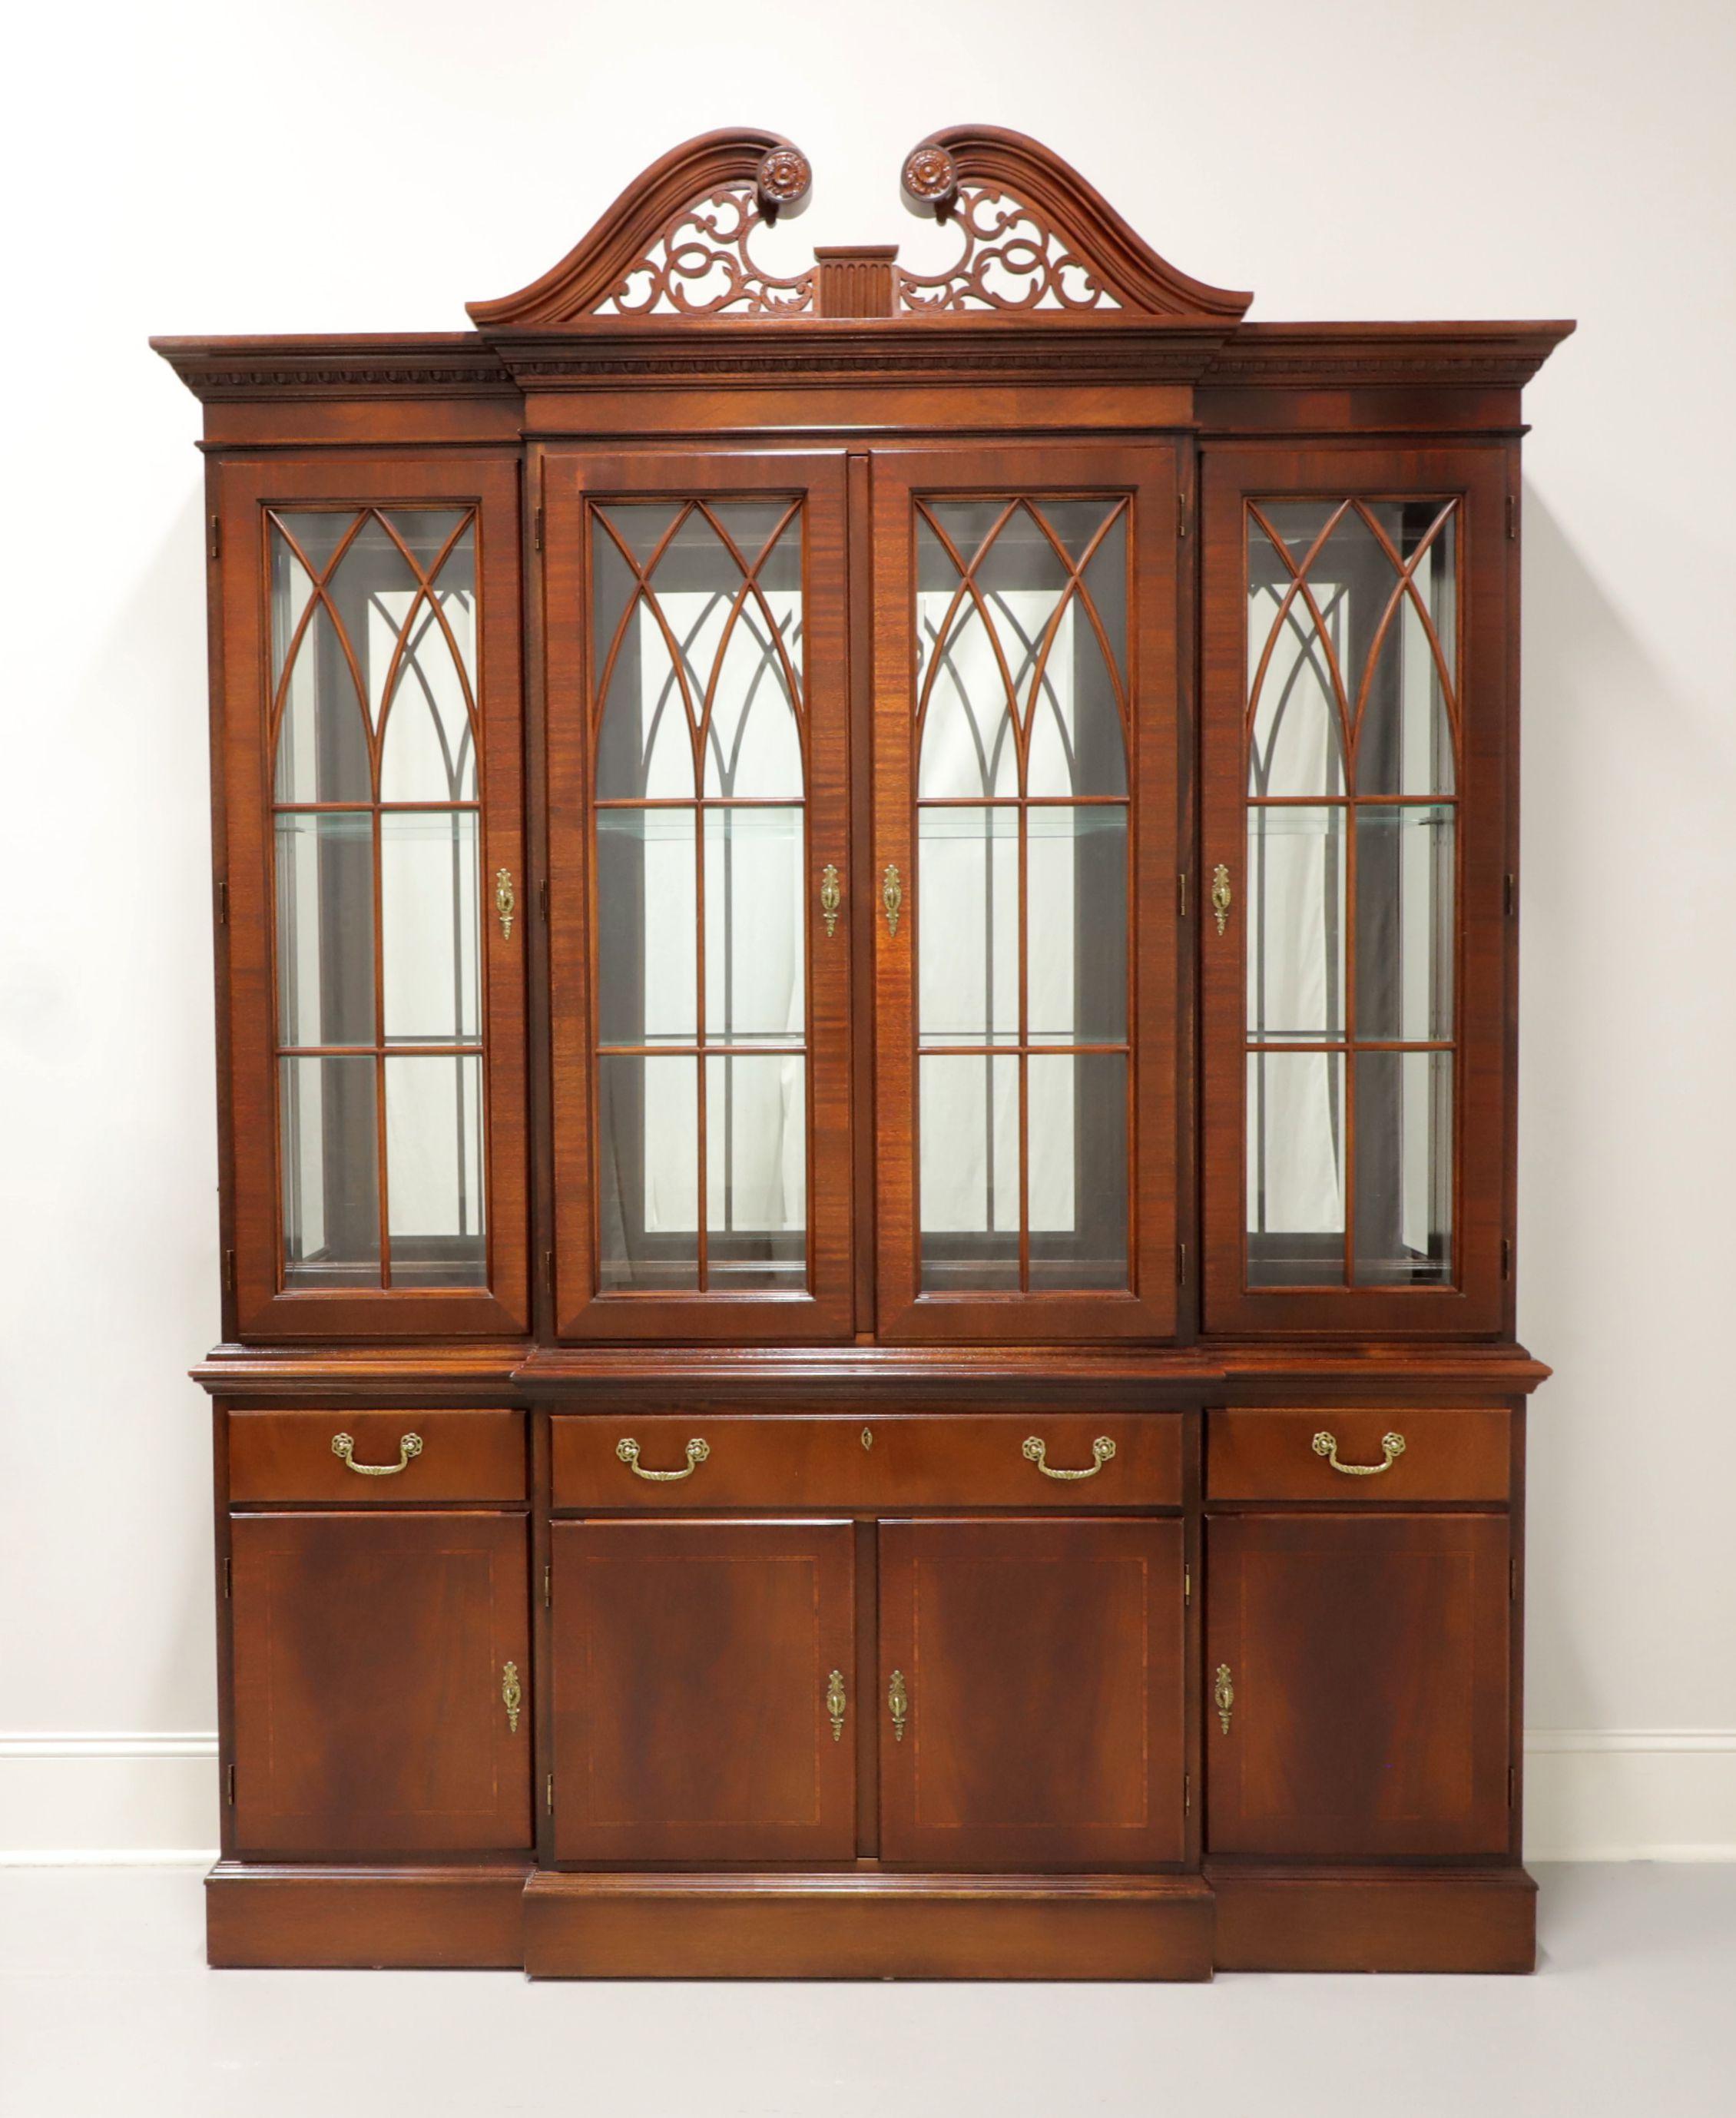 A Chippendale style breakfront china cabinet by Ethan Allen, from their 18th Century Collection. Mahogany with inlays and brass hardware. Upper cabinet features three lighted compartments with two adjustable plate-grooved glass shelves in each, four